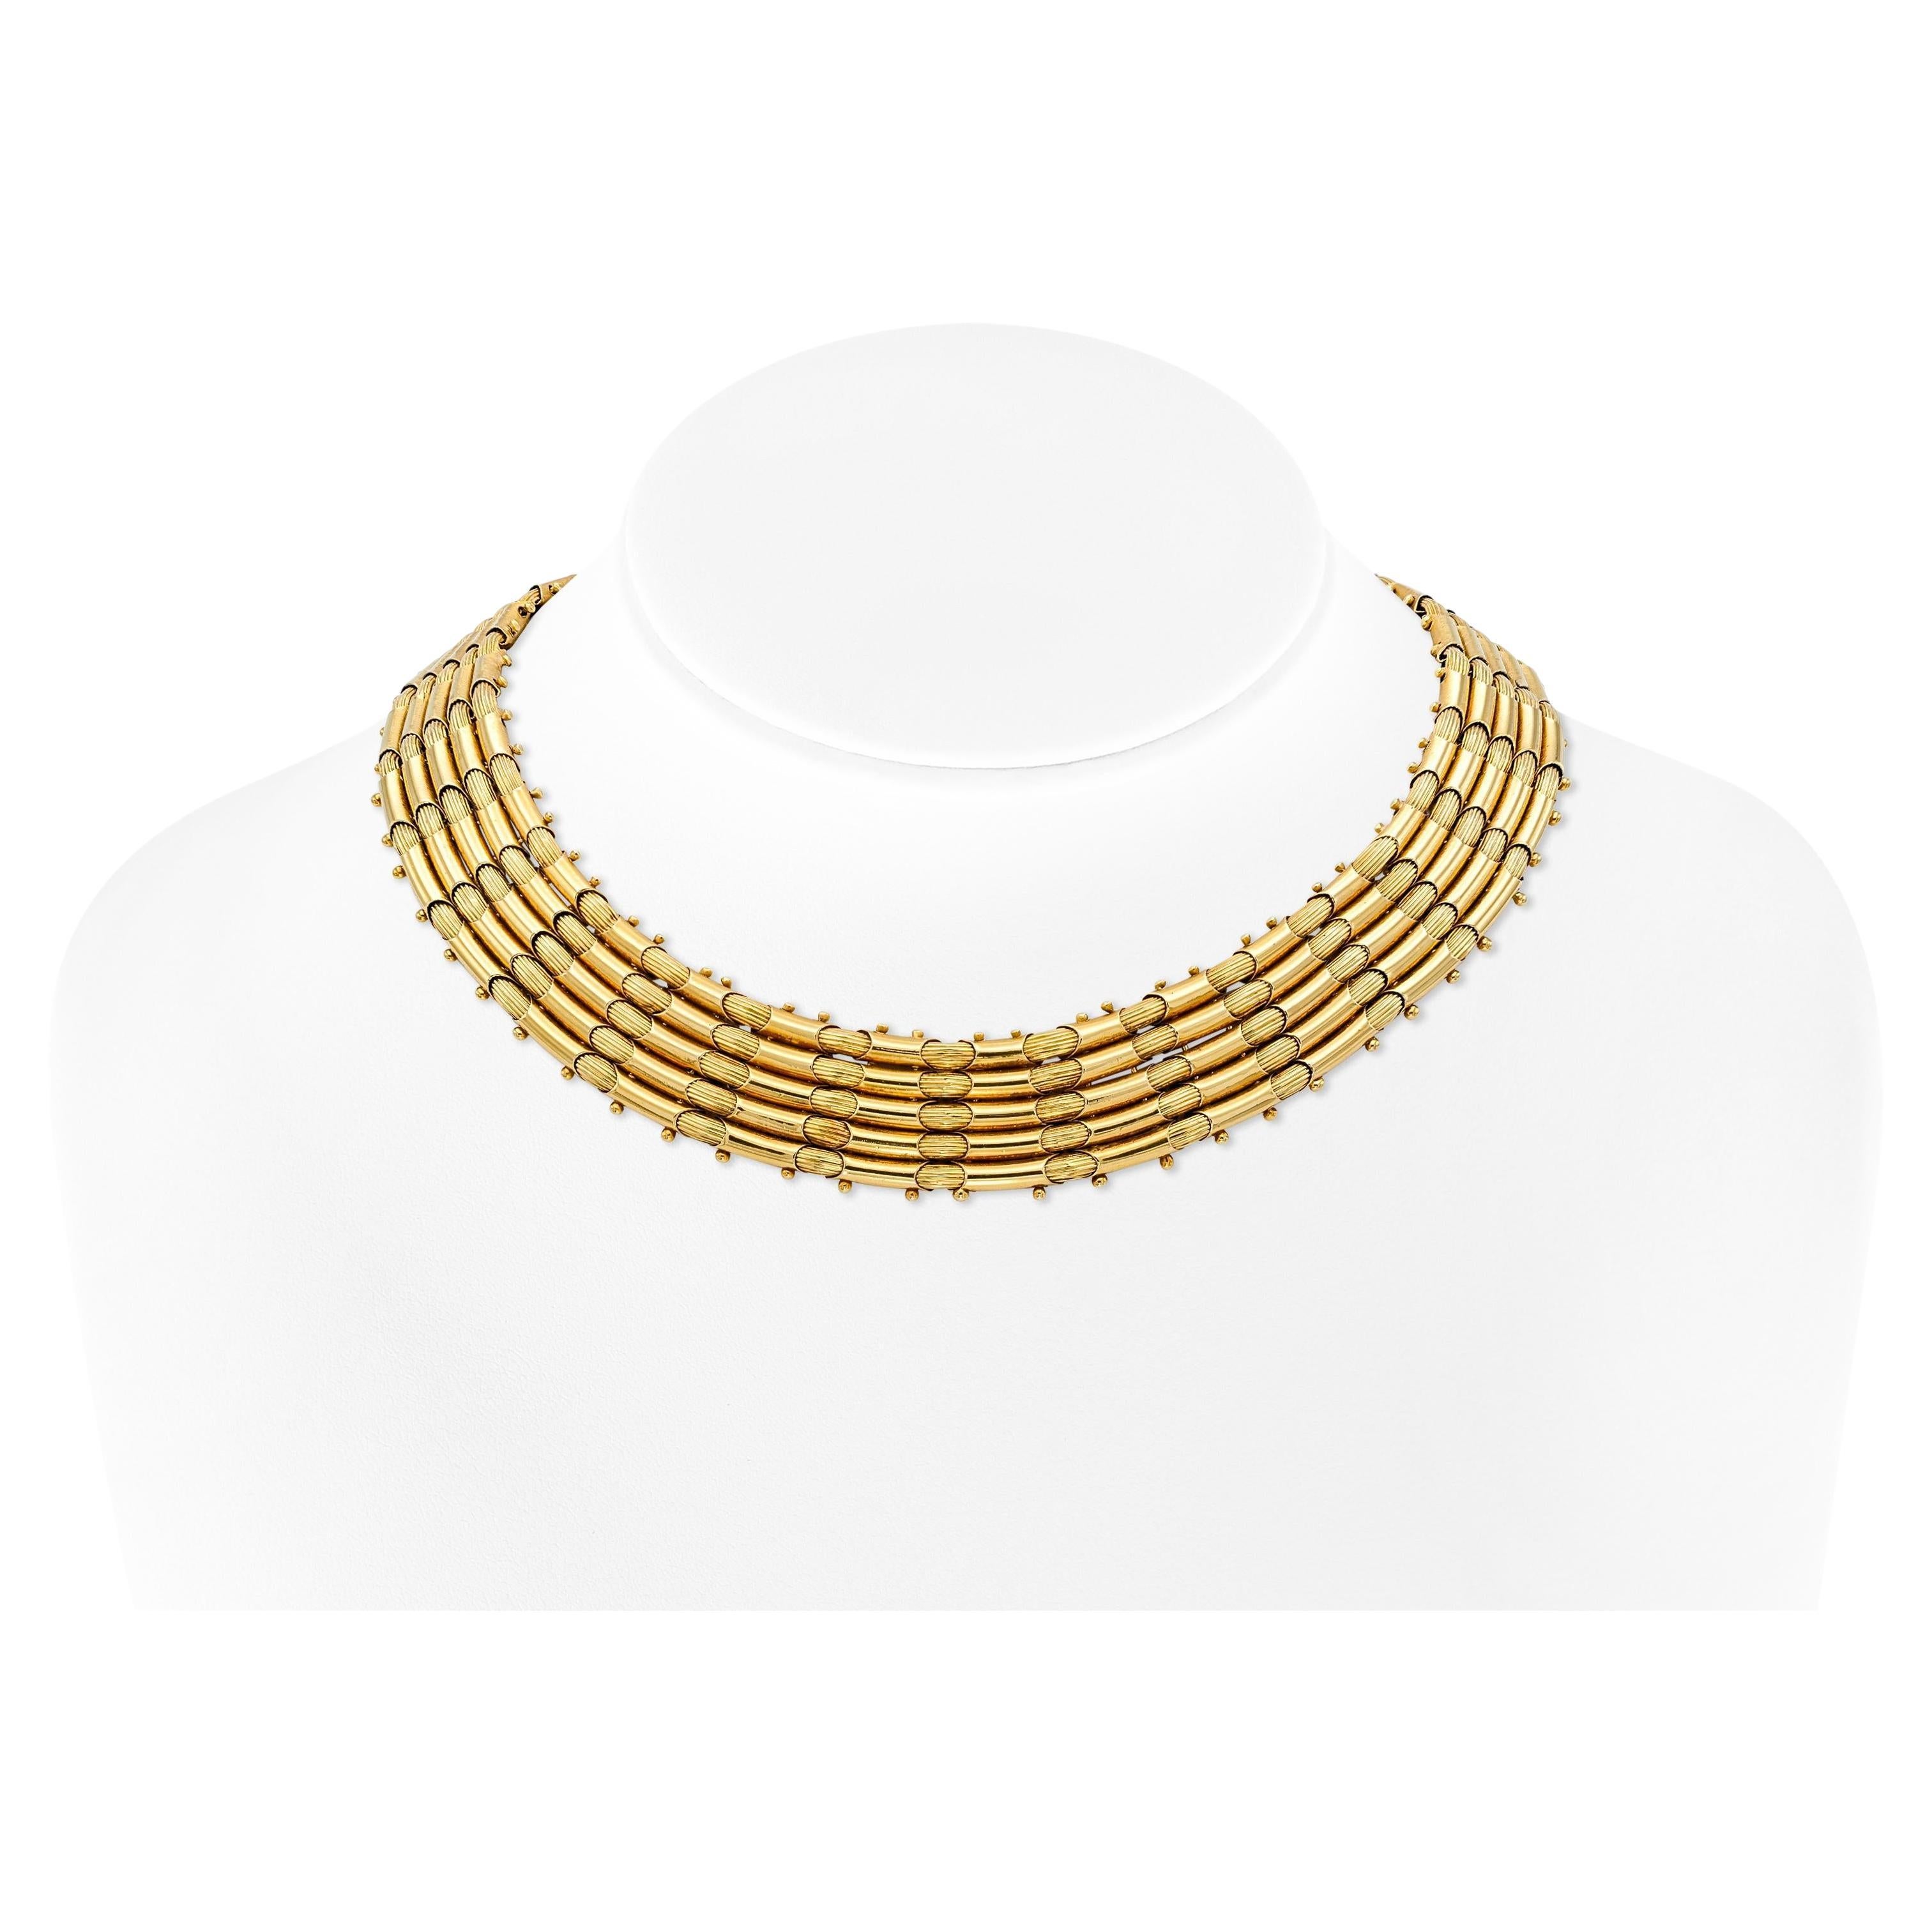 Vintage 1960s Lalaounis Gold Collar Necklace For Sale